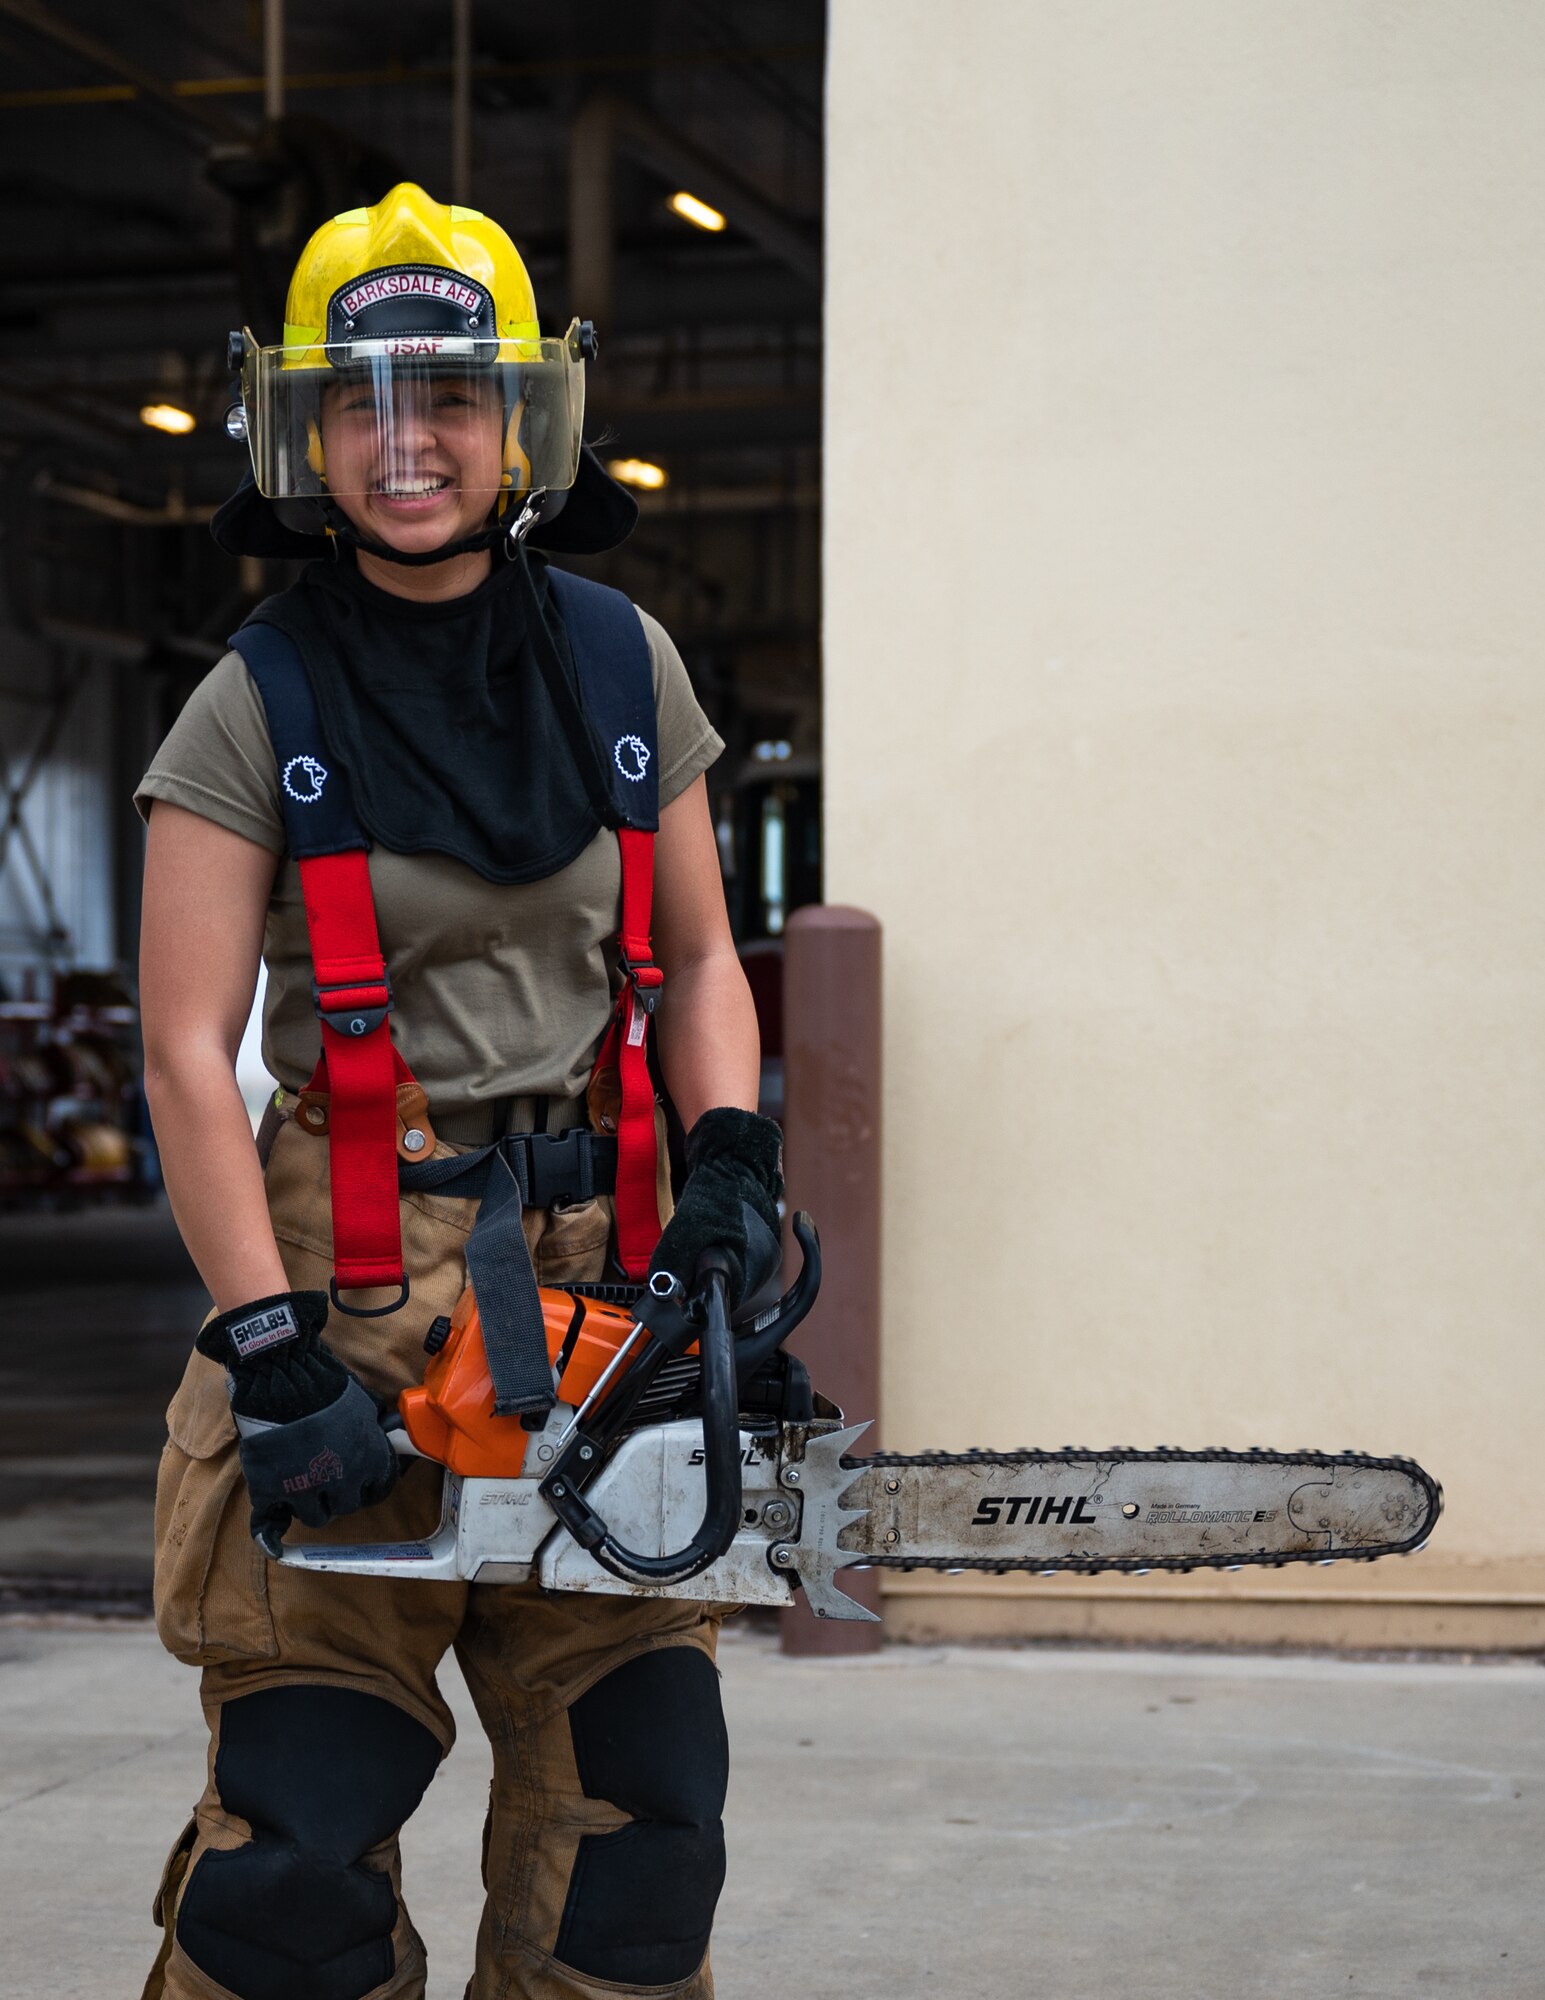 Fire protection Airmen are responsible for coordinating pre-incident plans, maintaining fire-fighting equipment, training Air Force personnel in fire prevention and controlling and extinguishing fires.